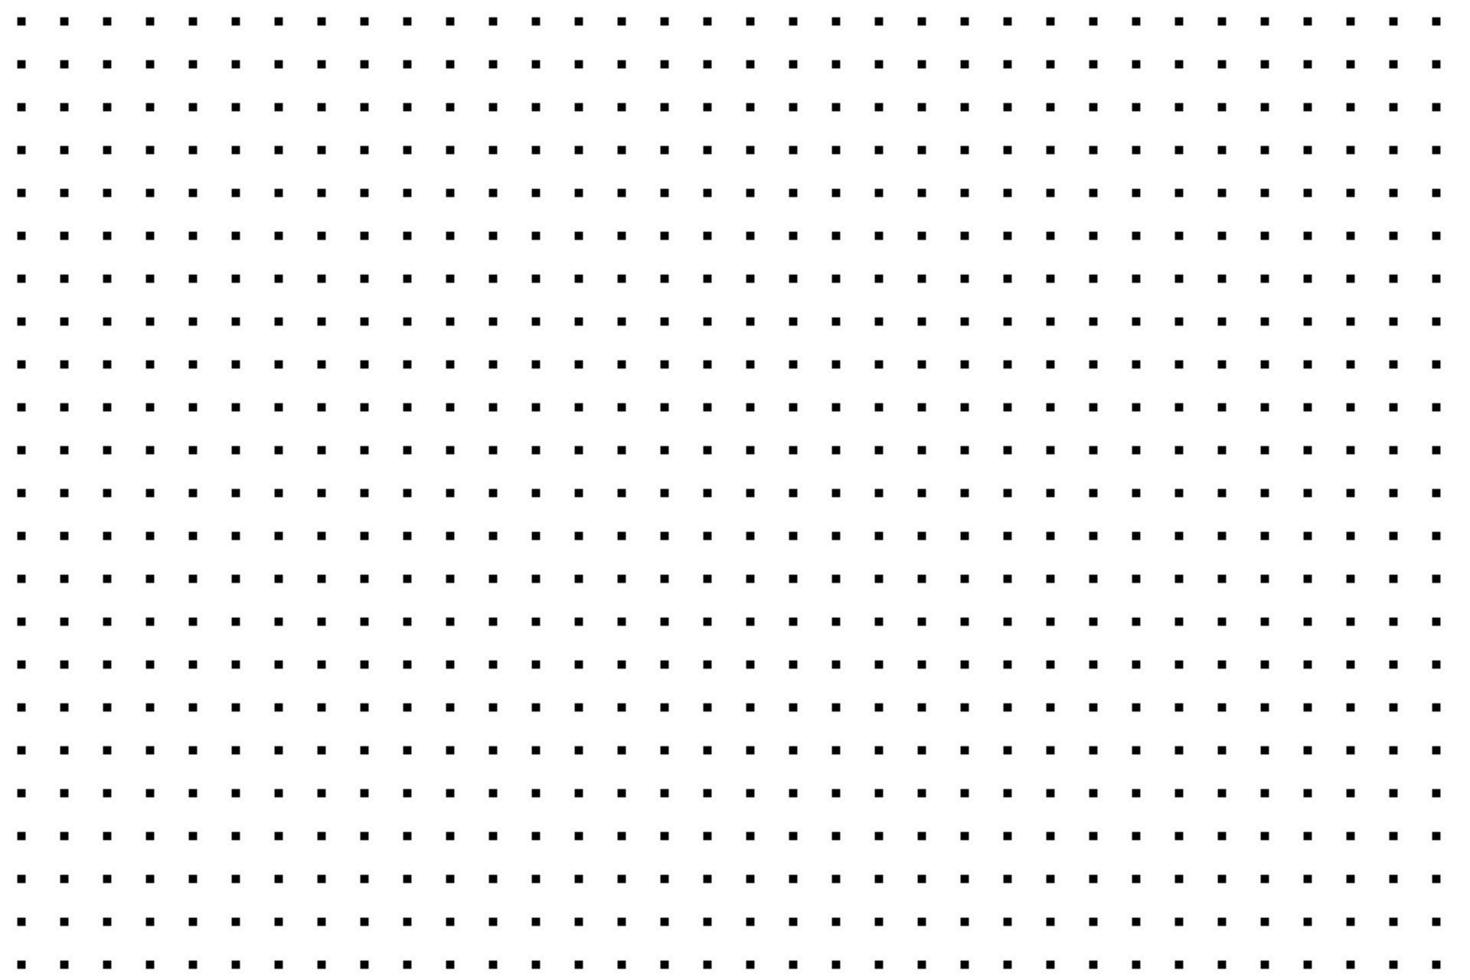 abstract seamless monochrome black dot grid with transparent bg. vector